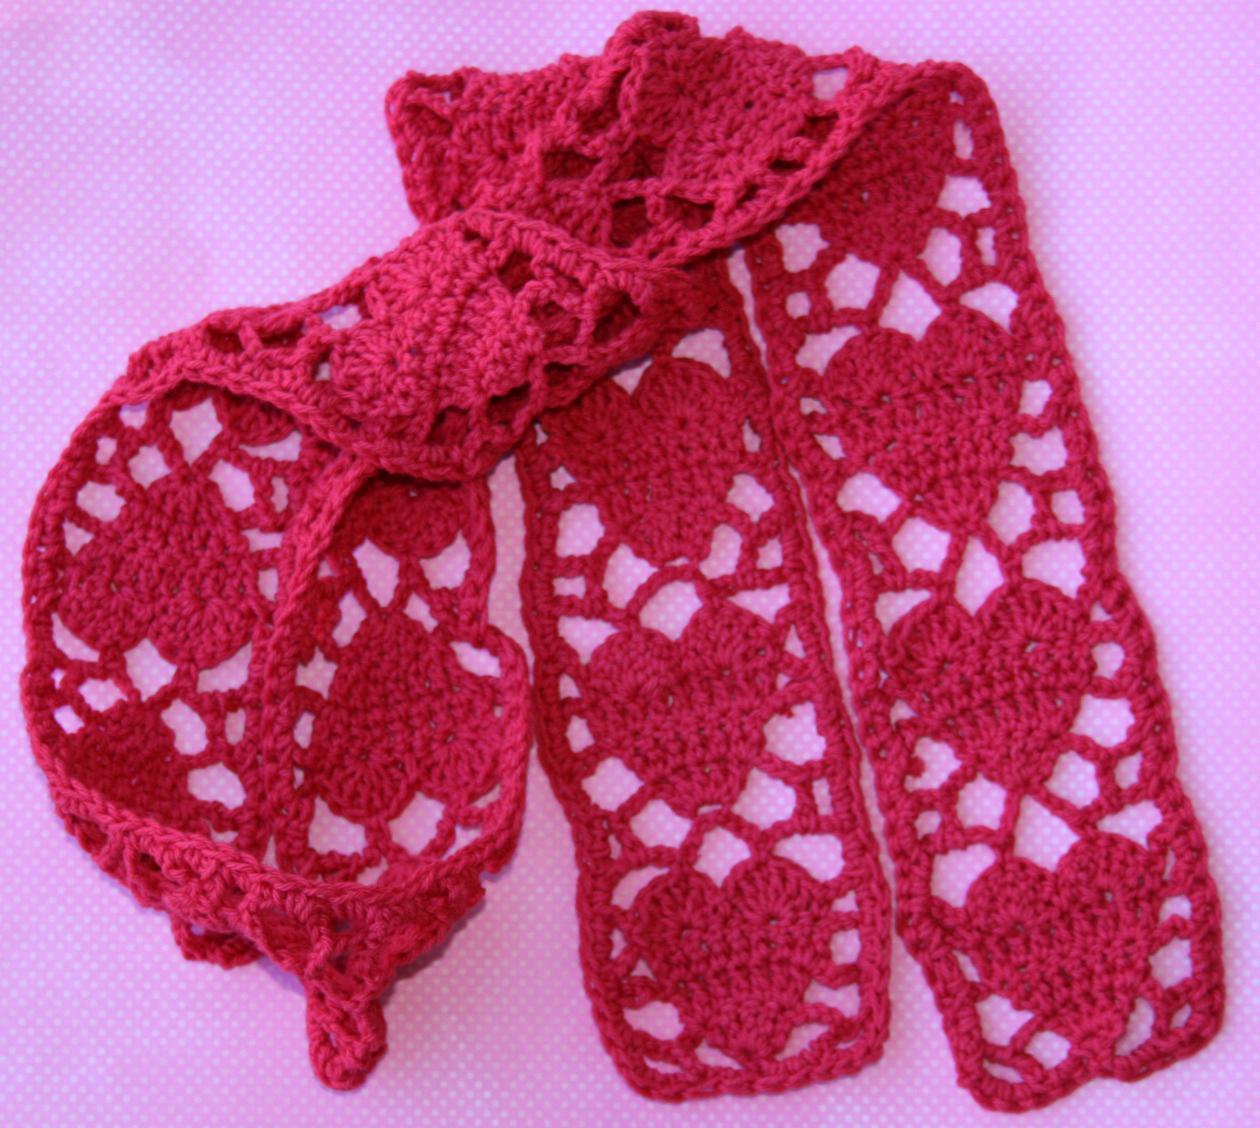 SRM Stickers Blog - Crocheted Heart Scarf by Ann - #crochet #twine #scarf #pink #red #Valentine